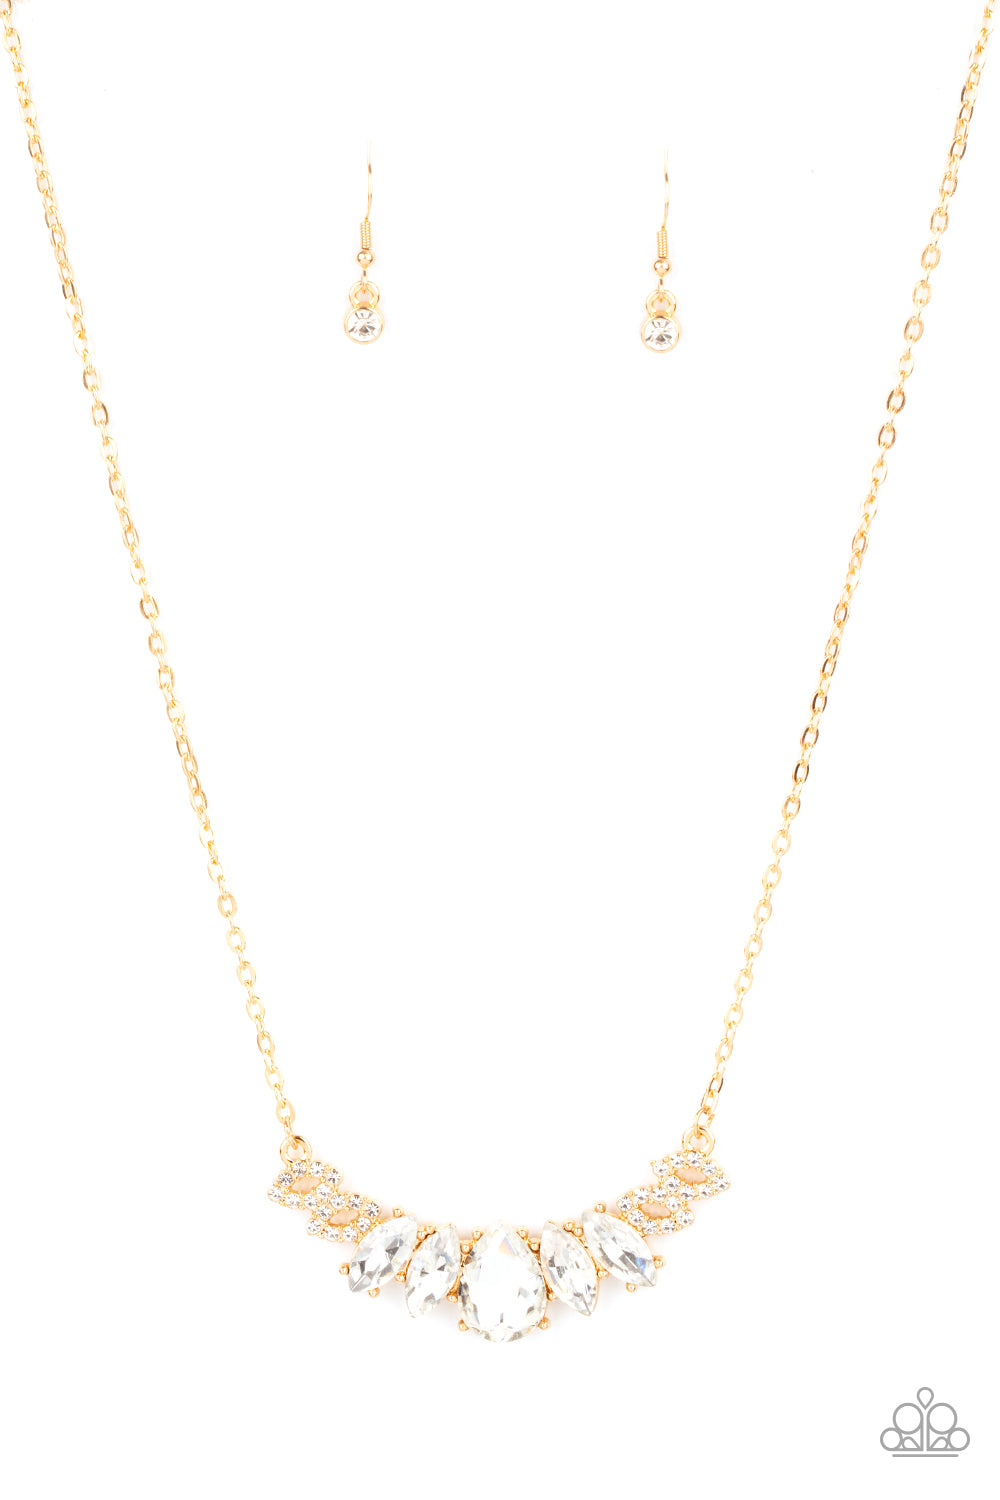 Paparazzi - Bride-to-BEAM - Gold Necklace & Earrings